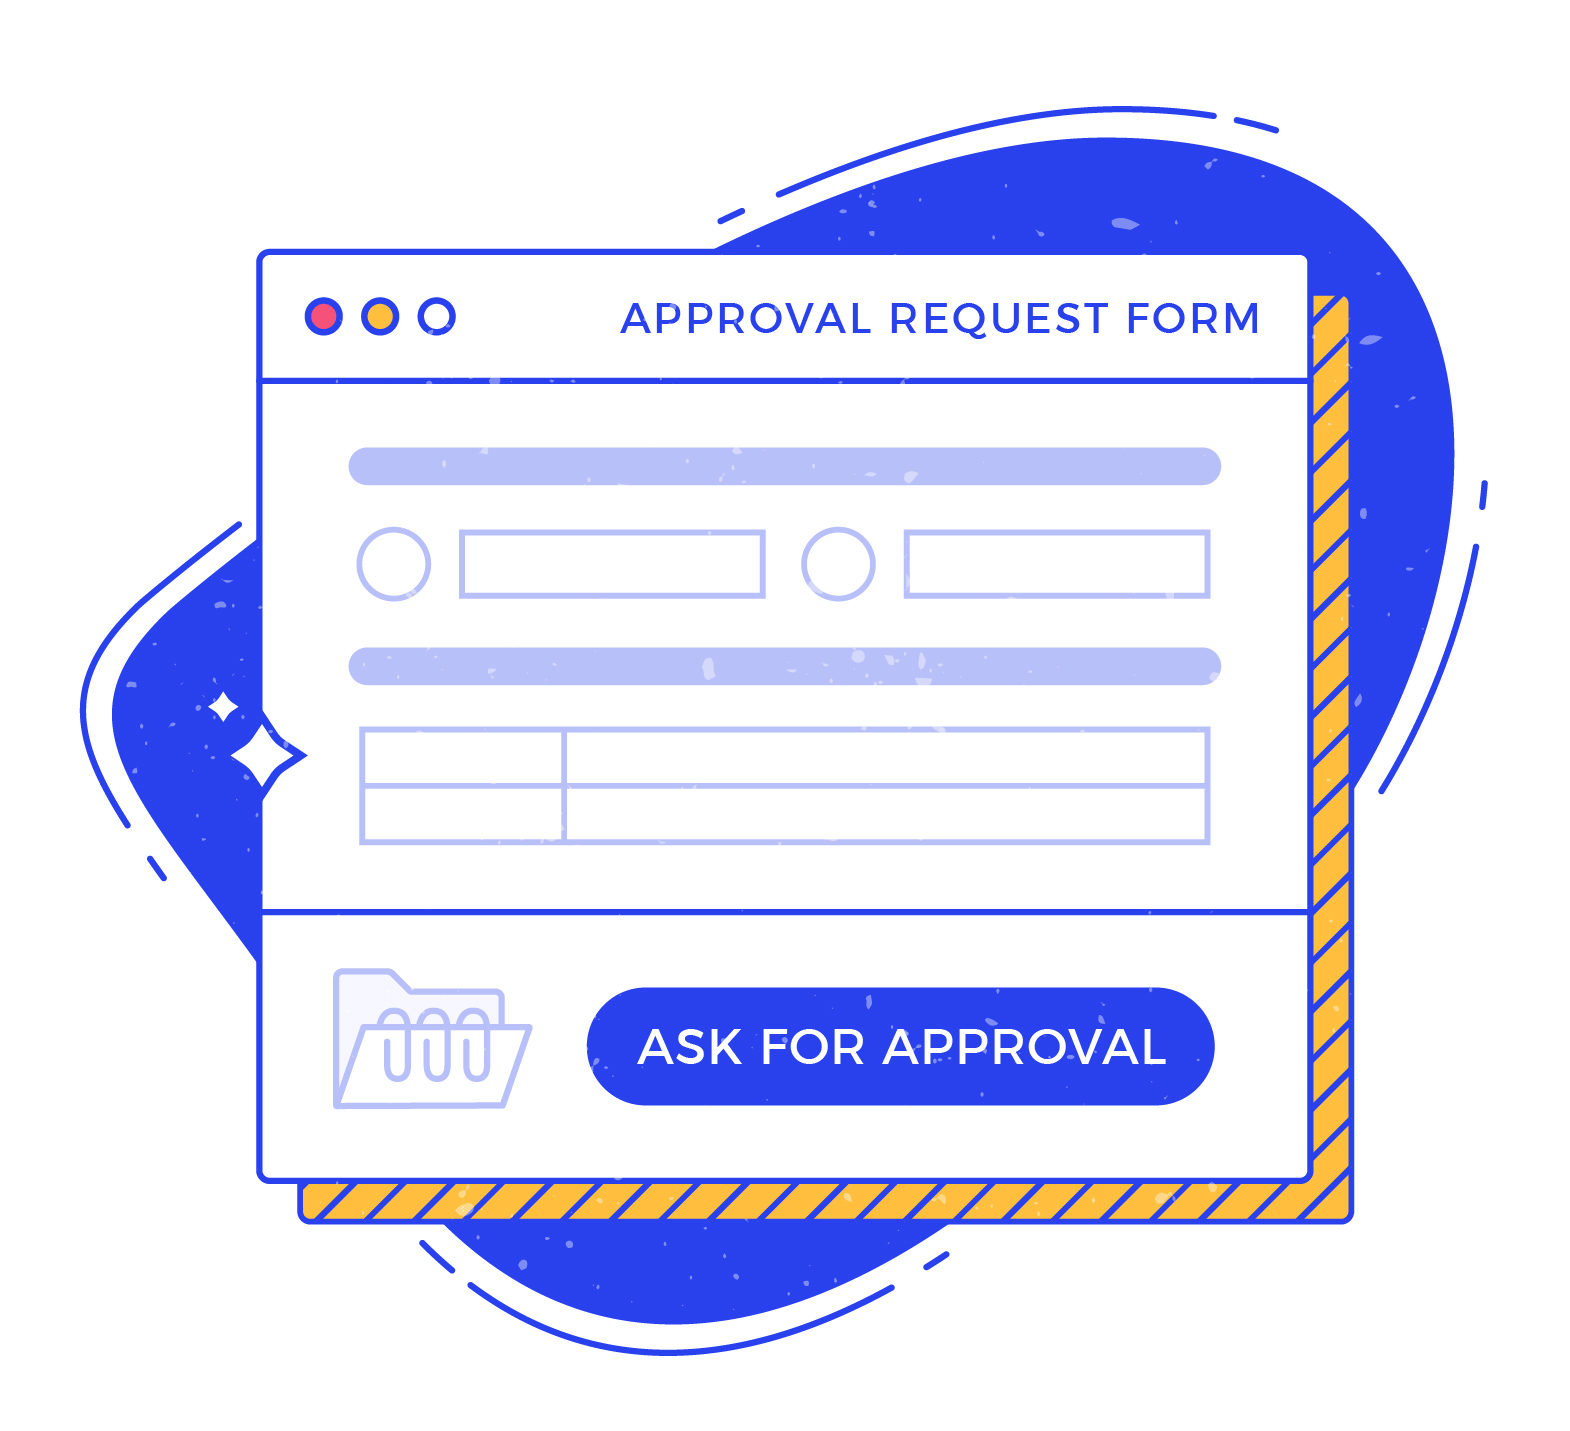 We can help you improve your approval process